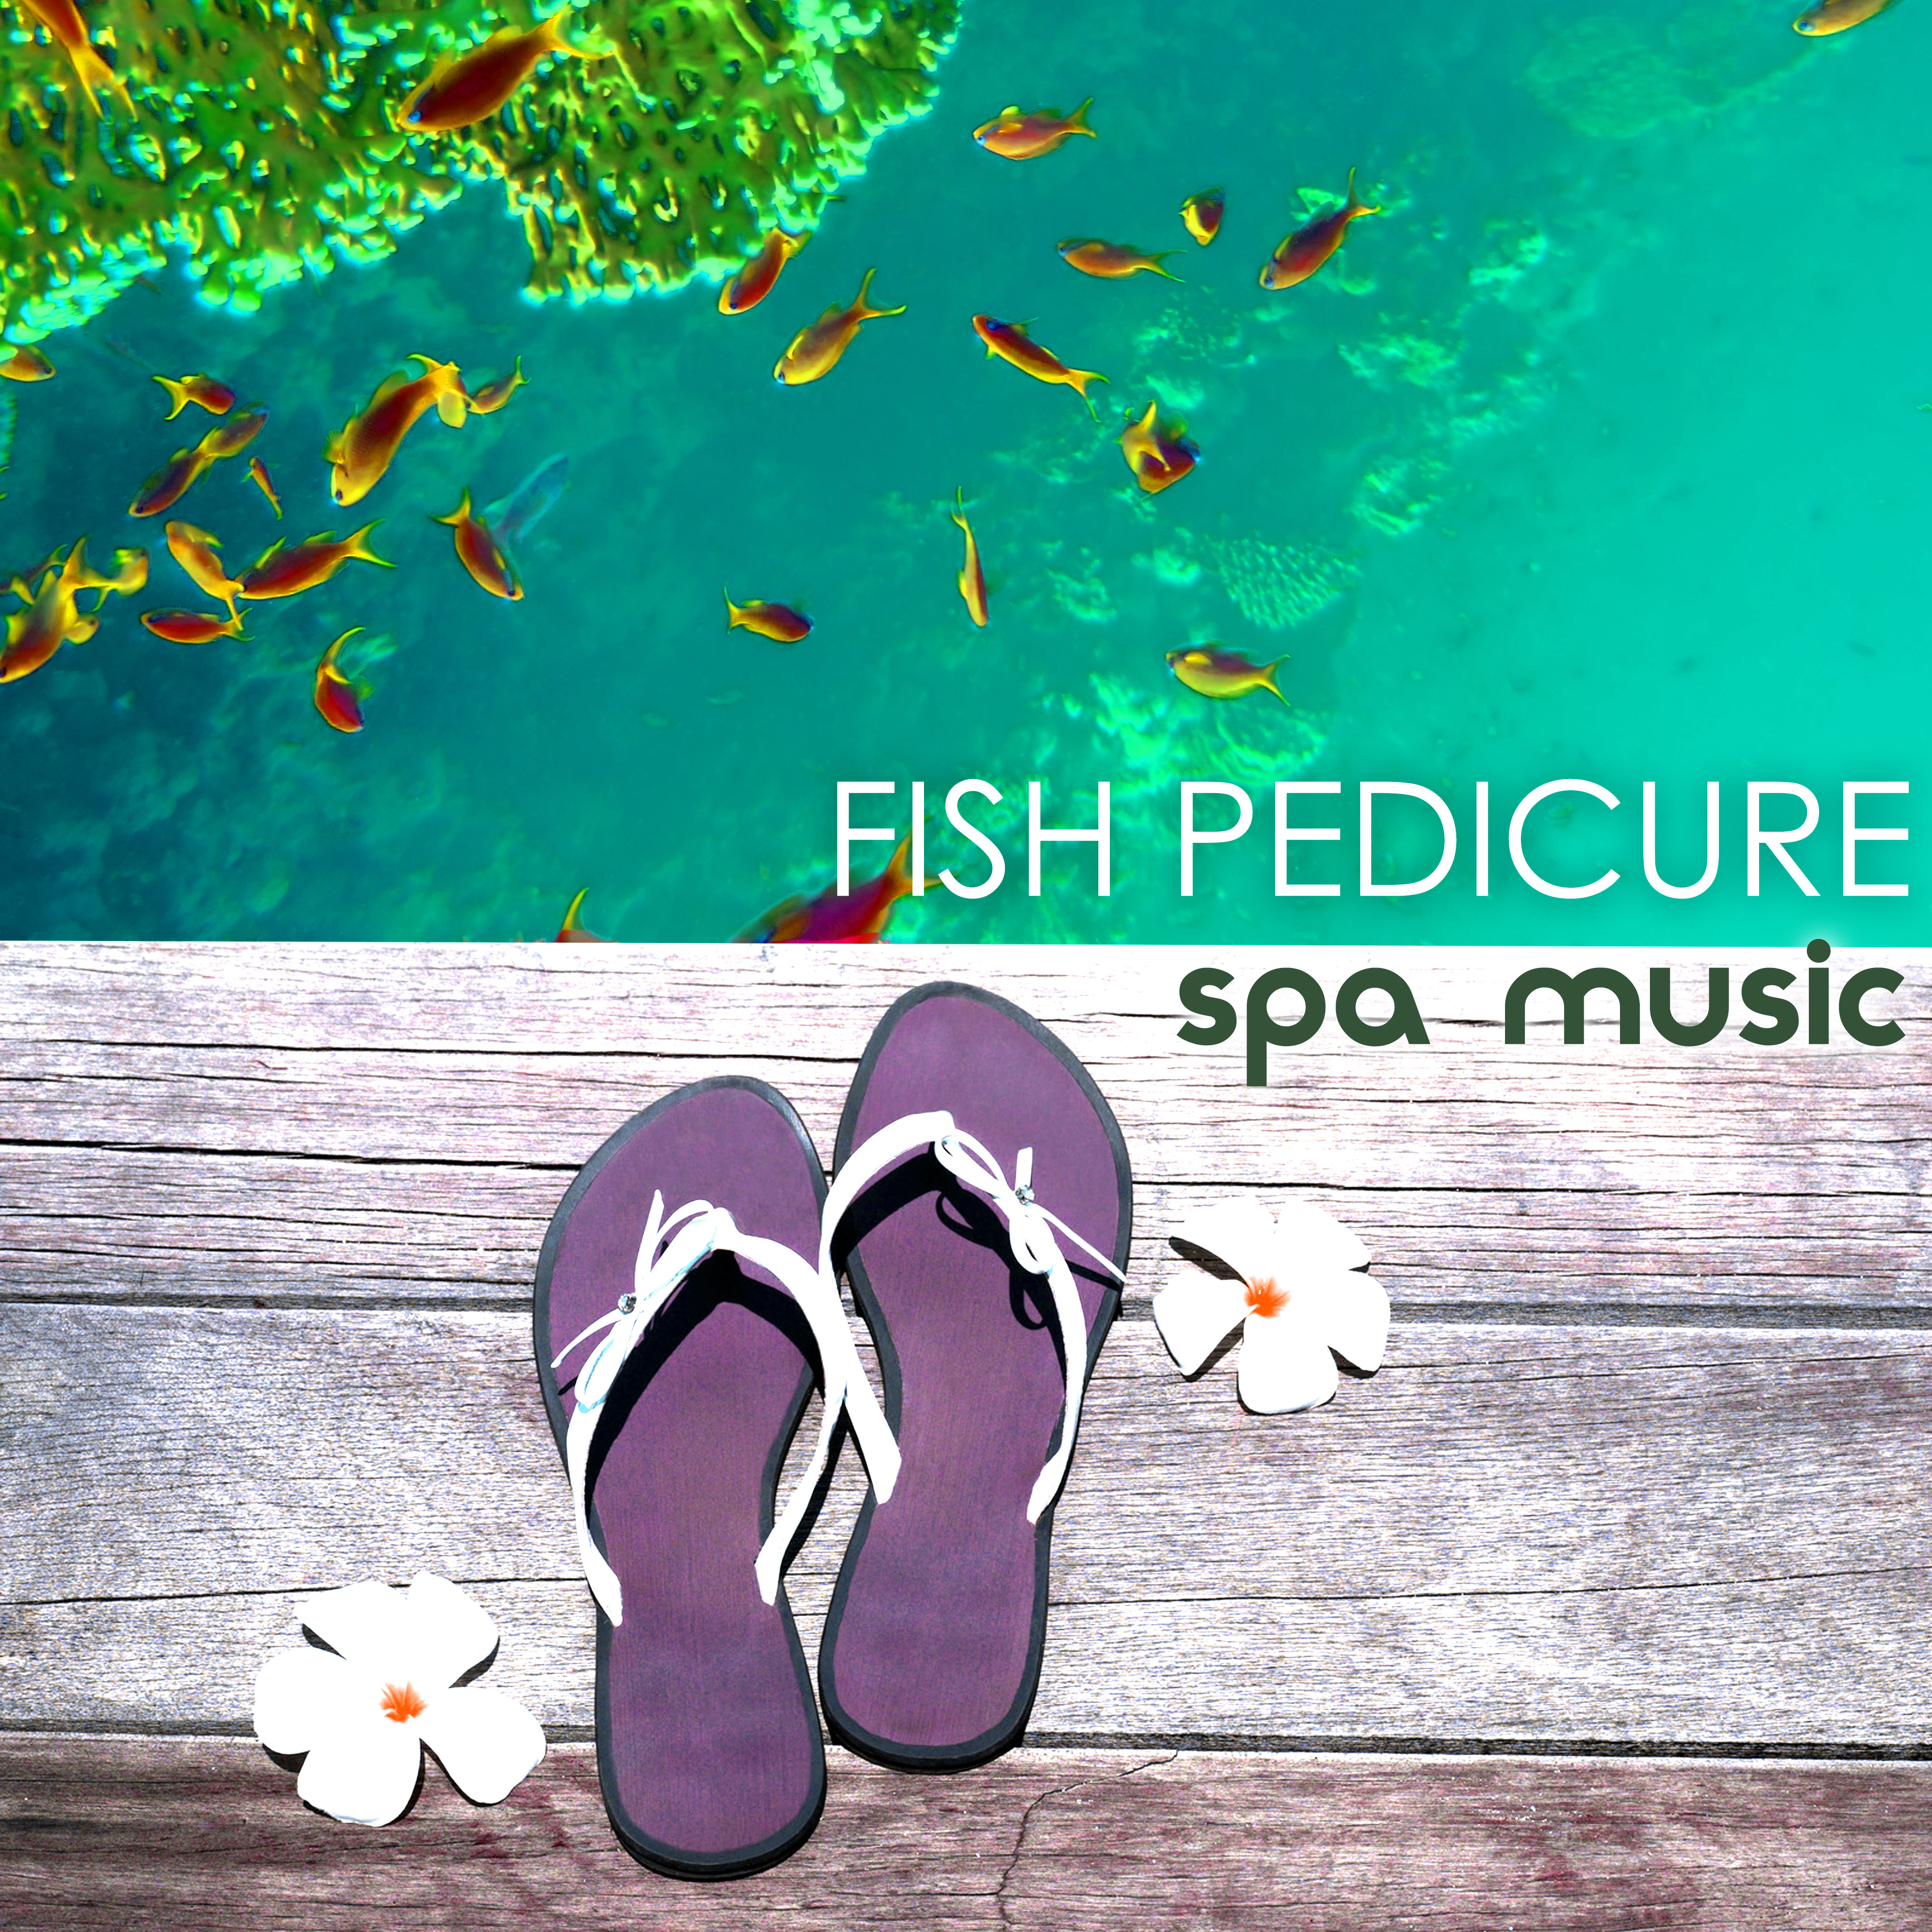 Fish Pedicure Spa Music – Peaceful Relaxing Music for Fish Therapy, Pedicure, Massage & Fish Foot Spa in Beauty Center